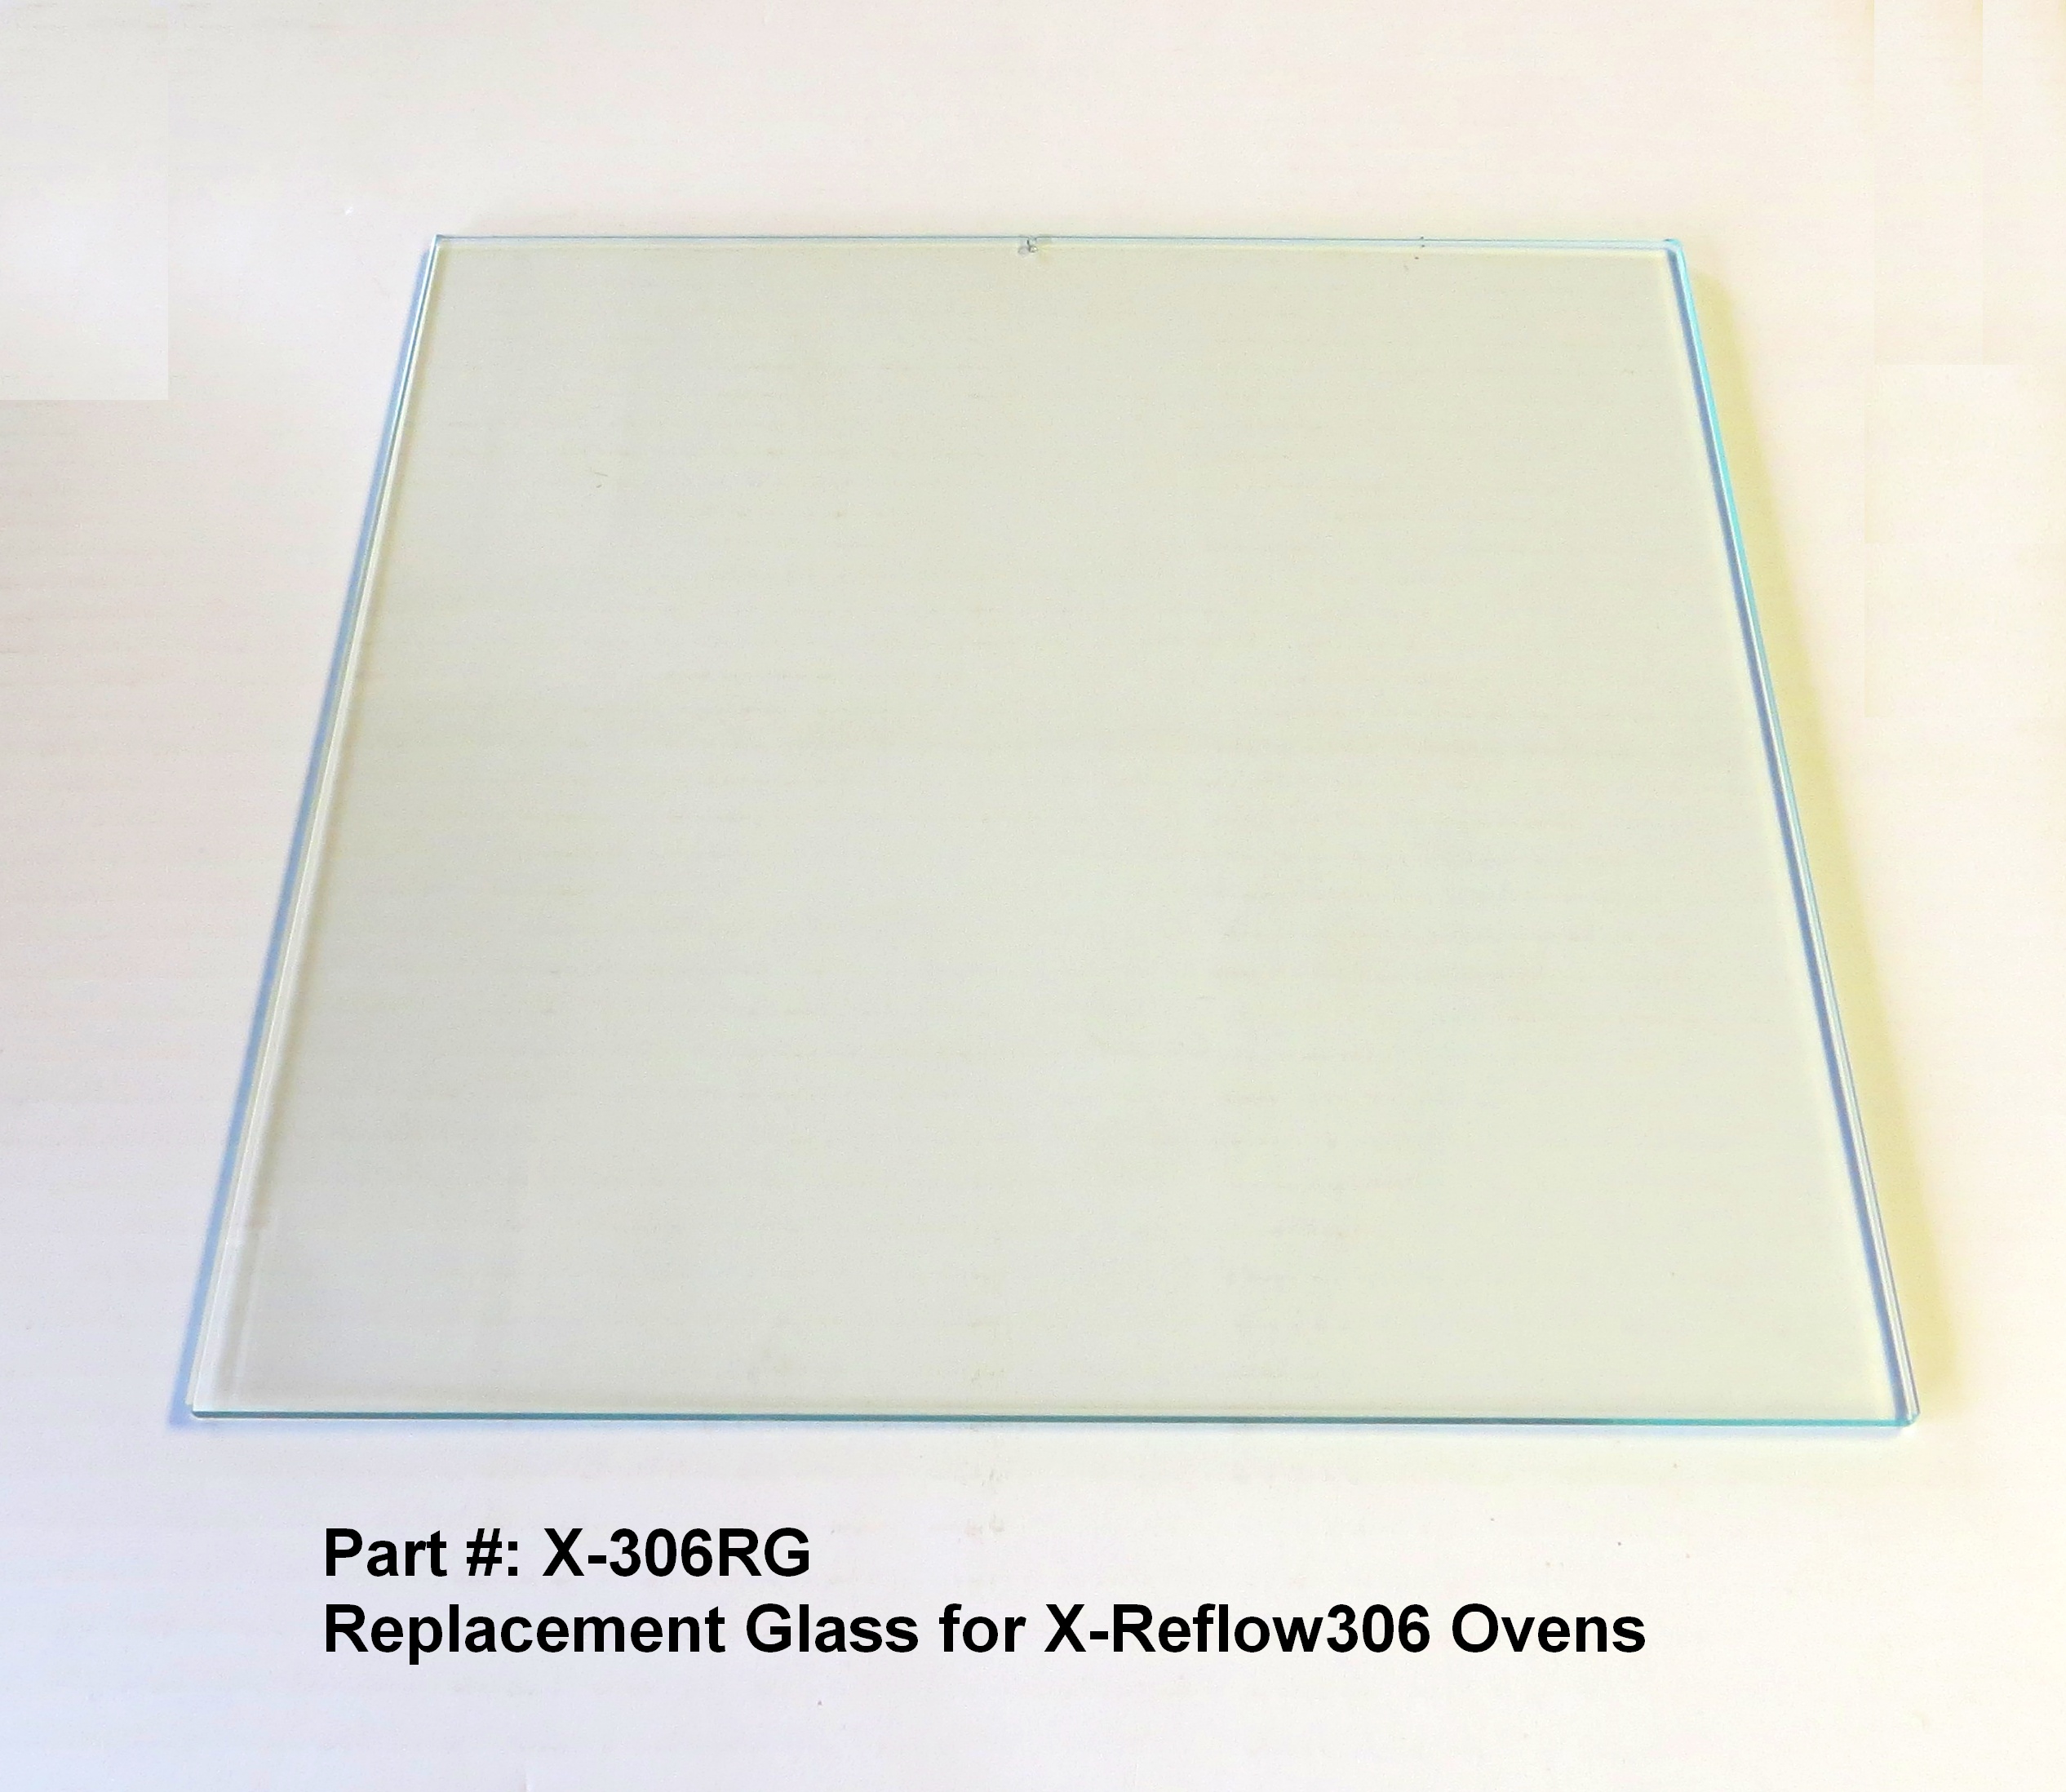 Replacement  Glass  for X-Reflow306 Ovens Top Clam-Shell window